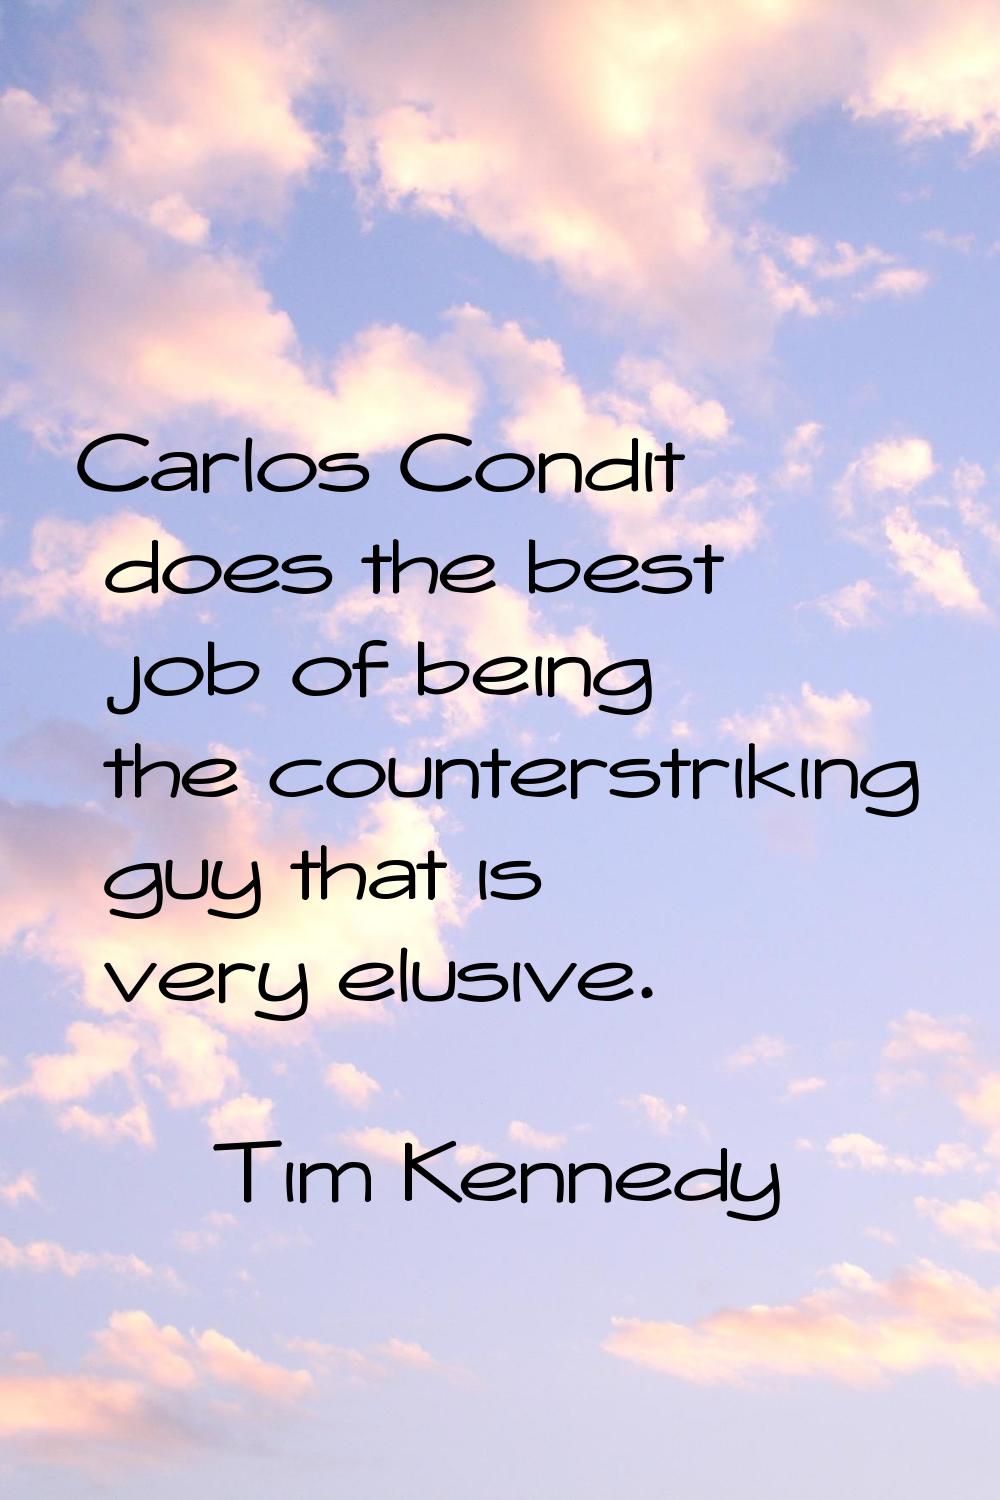 Carlos Condit does the best job of being the counterstriking guy that is very elusive.